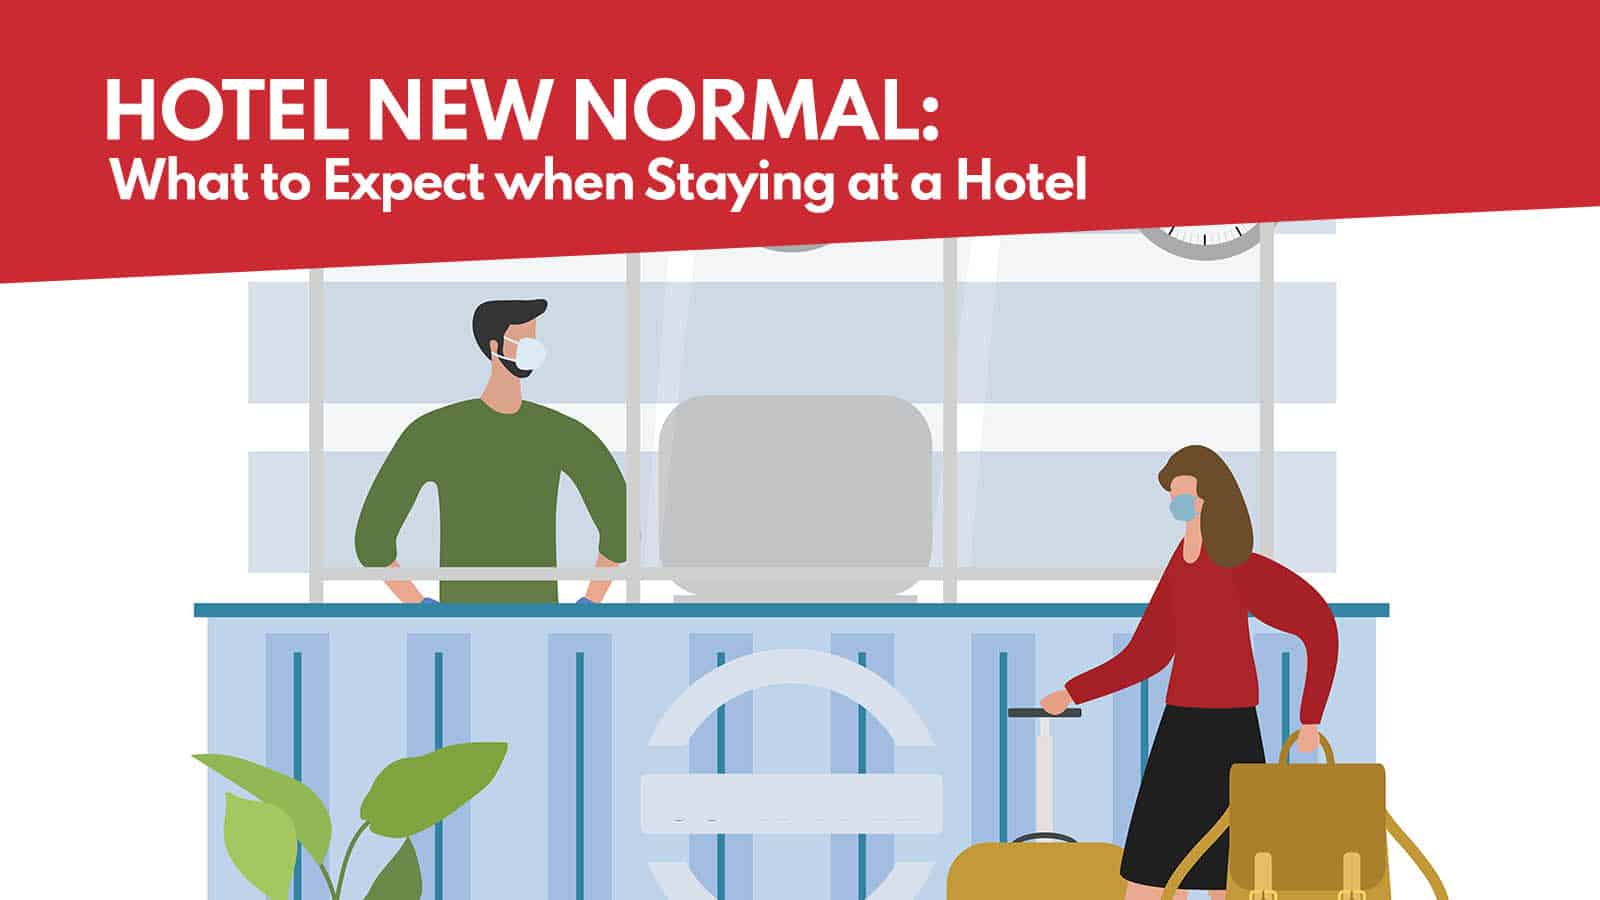 HOTEL NEW NORMAL GUIDELINES: What to Expect when Staying at a Hotel